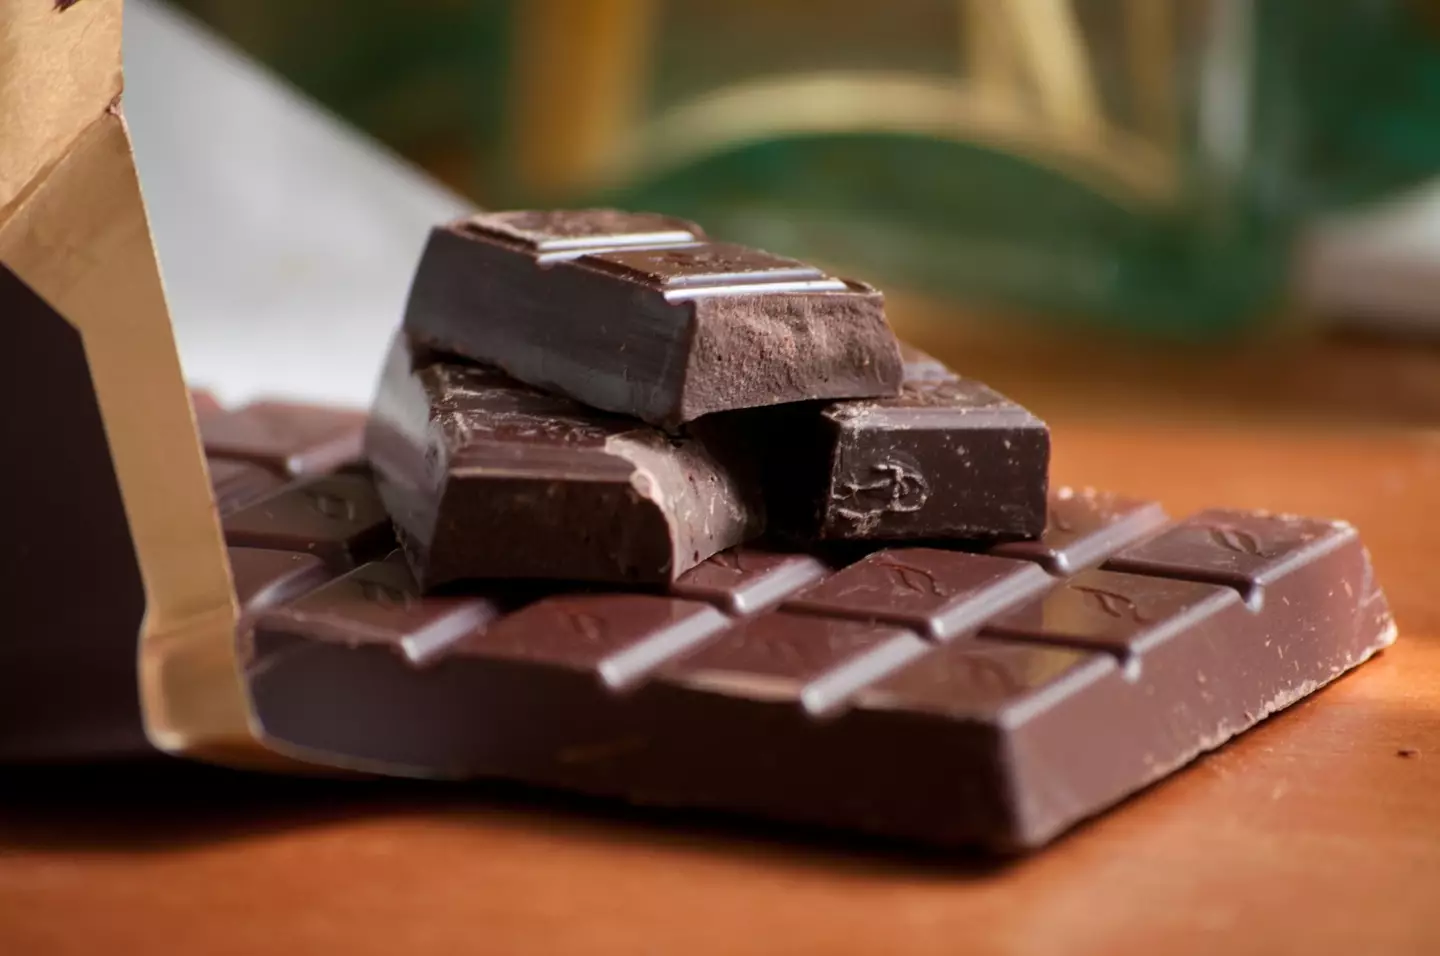 Chocolate products are being recalled.